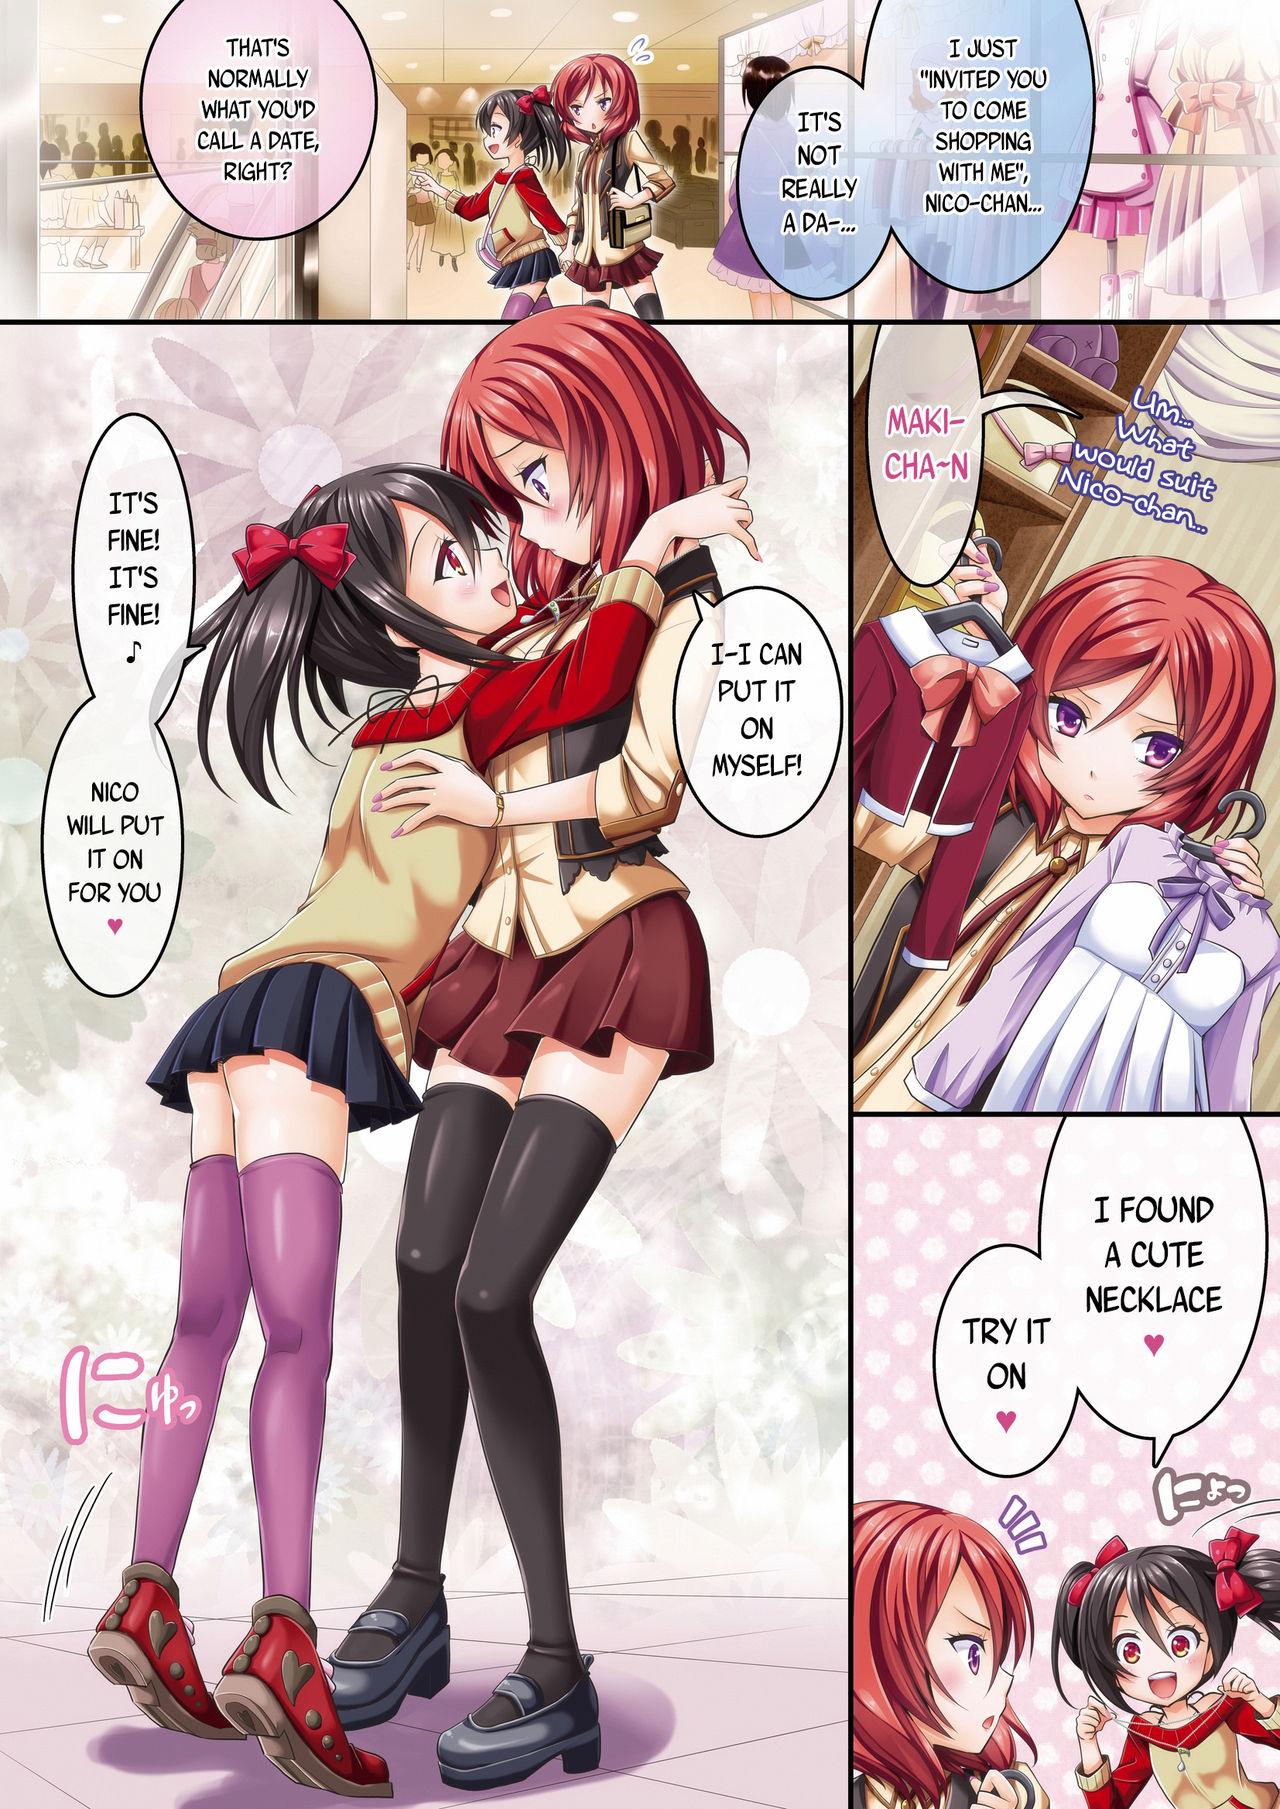 Shaking NorE - Love live Morocha - Page 4